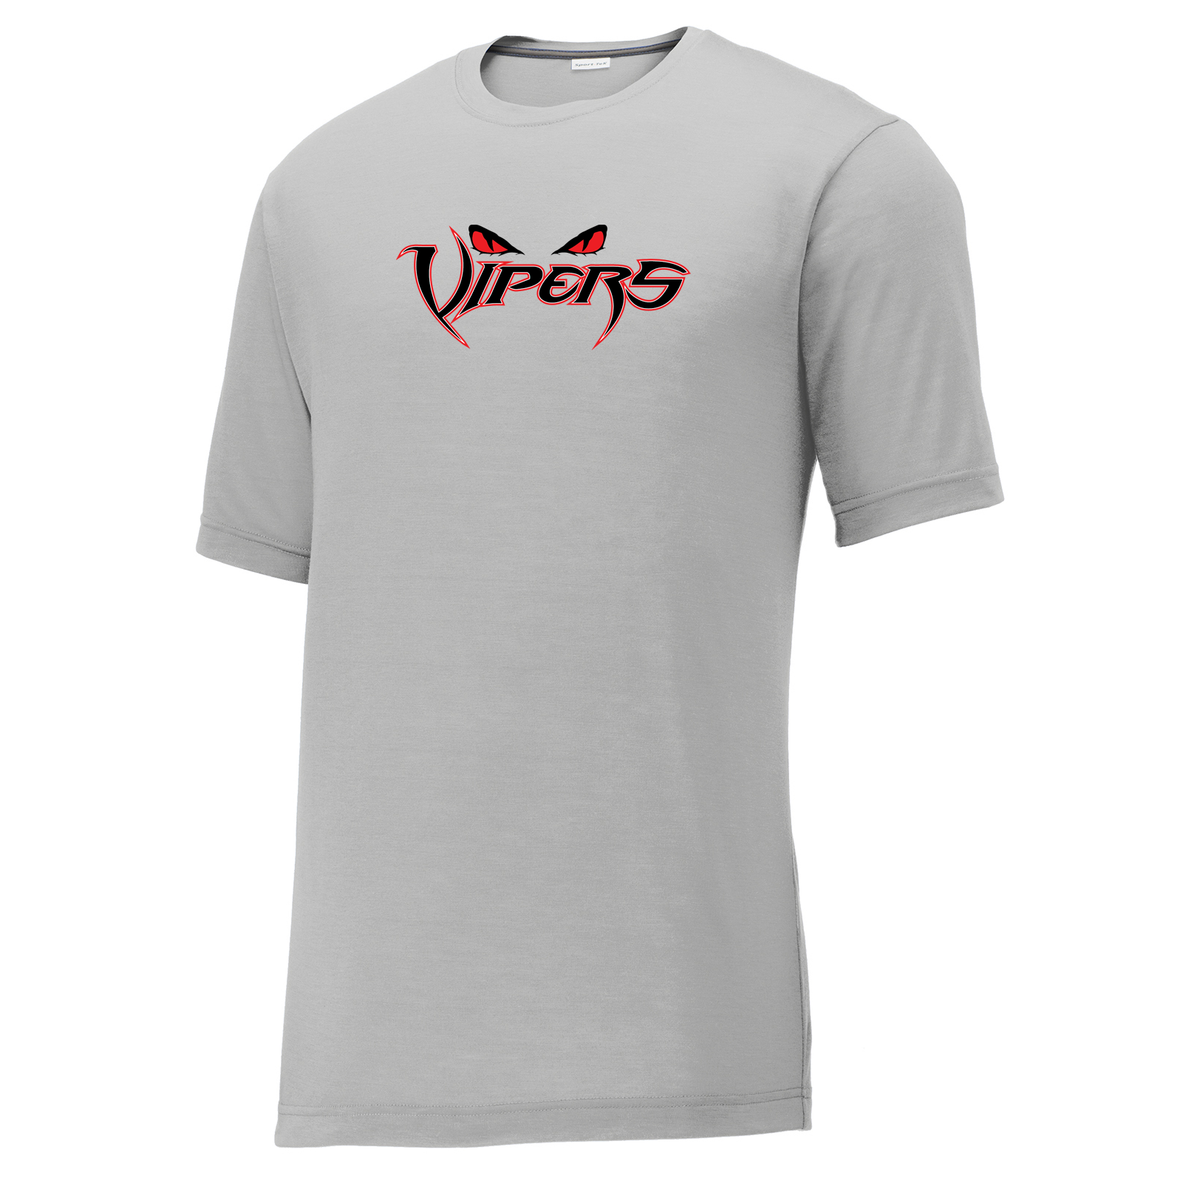 Vipers CottonTouch Performance T-Shirt